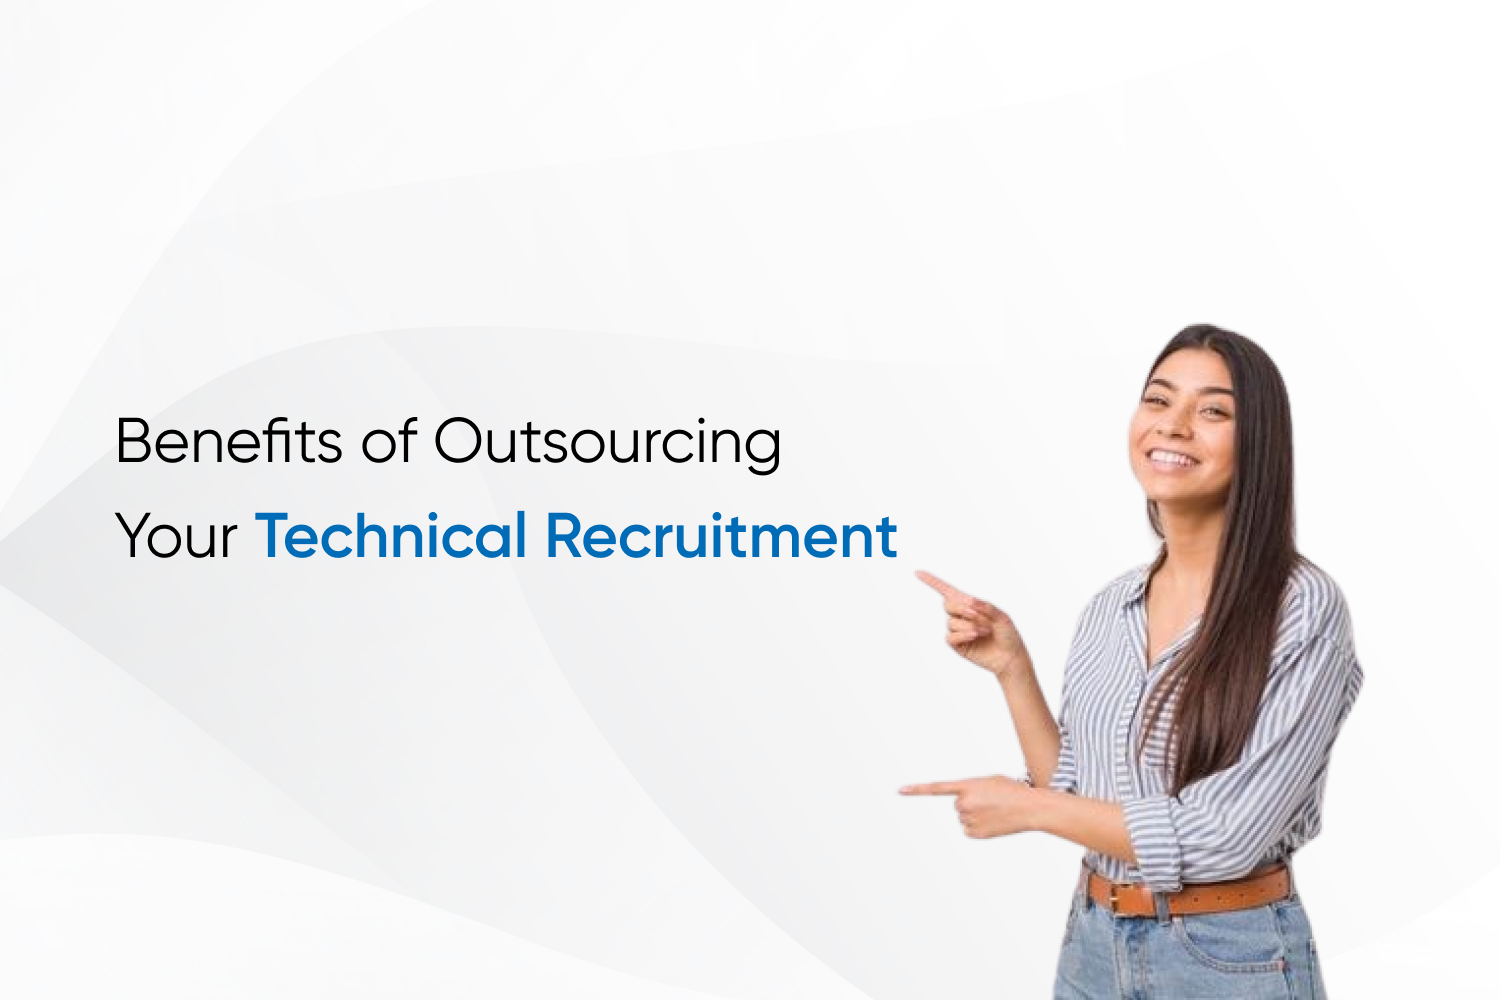 Benefits of Outsourcing Your Technical Recruitment